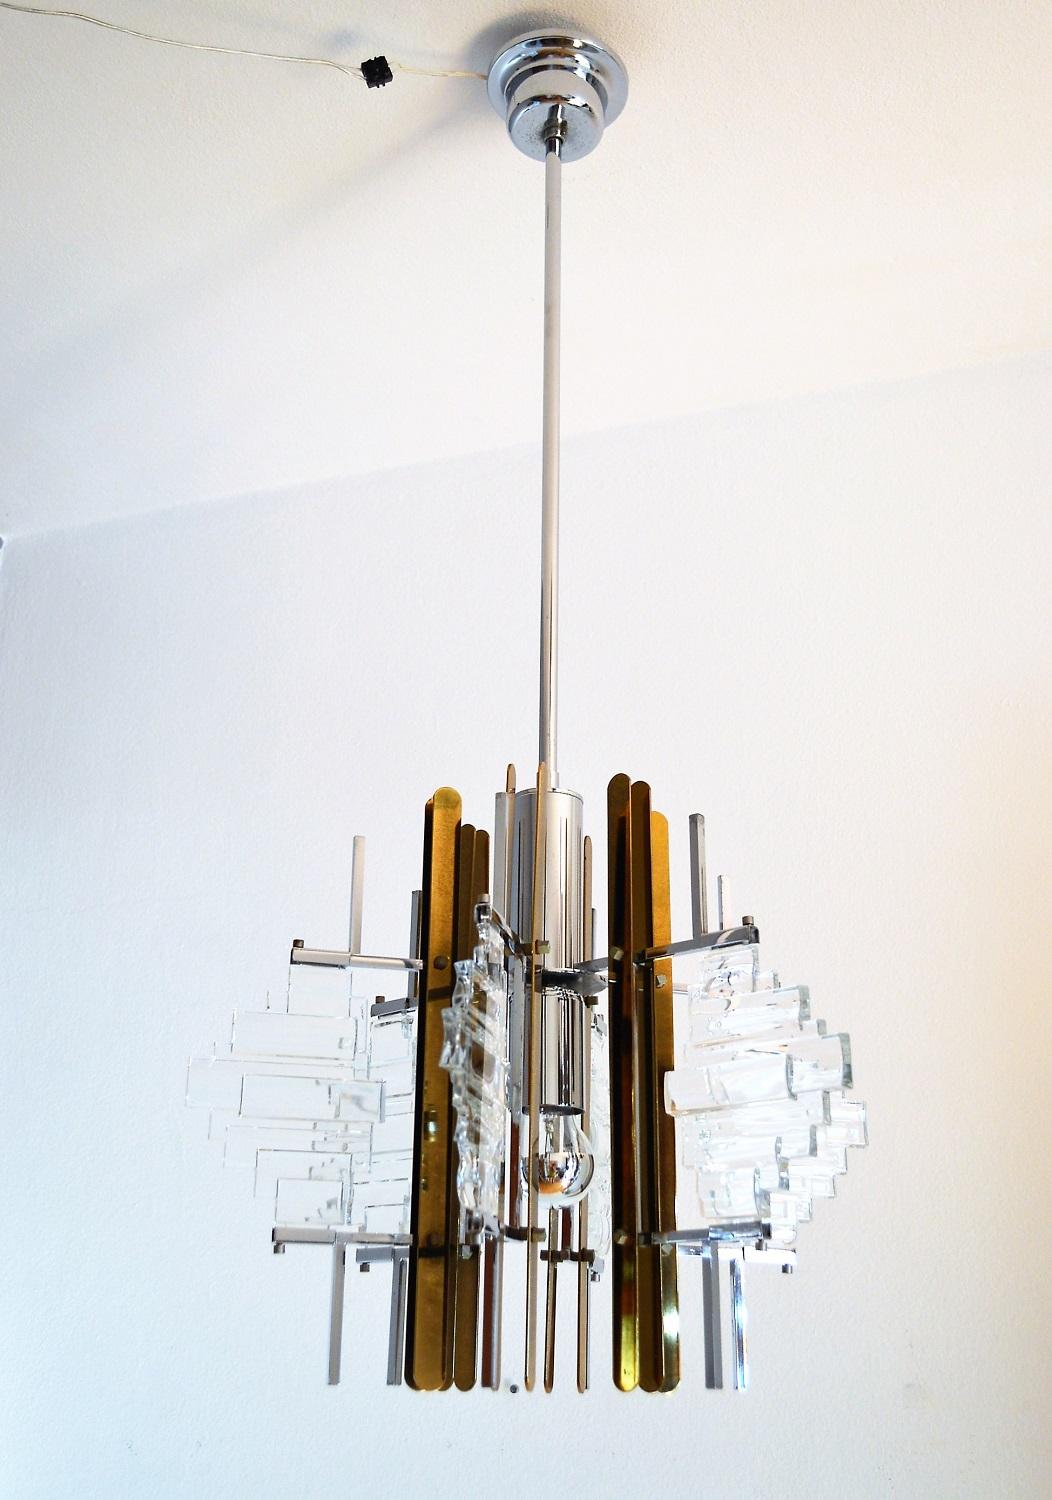 Beautiful chandelier typical for the Italian modernist era, designed by Gaetano Sciolari.
The chandelier is made of shiny chrome plated and dark brass parts as well as 5 glass parts in architectonic design in the form of a star made of 5 arms